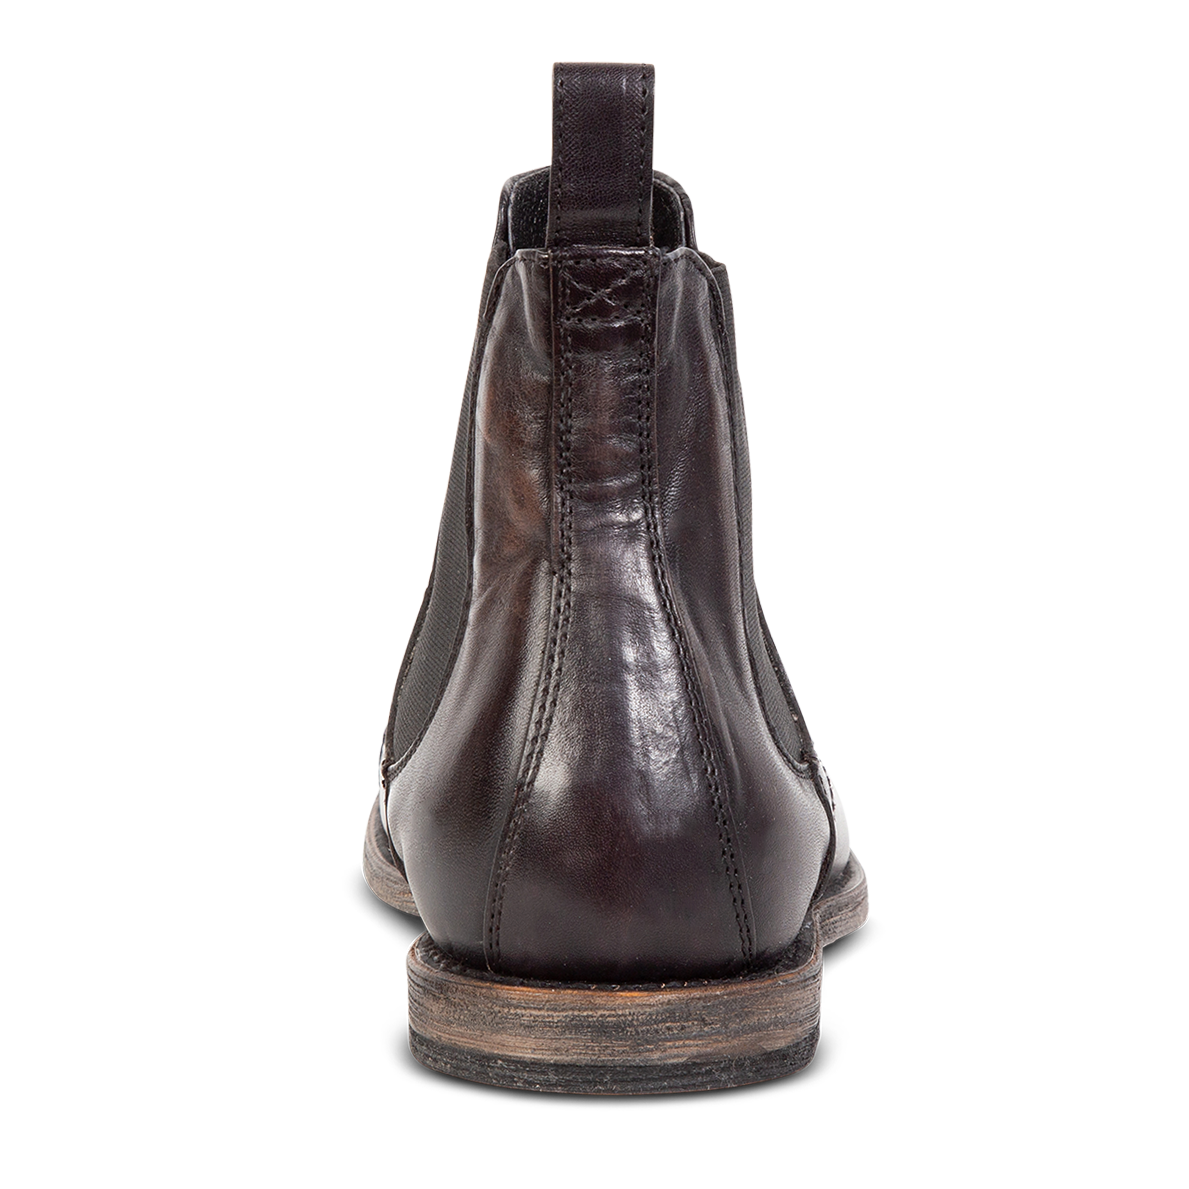 Back view showing leather pull tab on FREEBIRD men's Curtis black leather chelsea boot